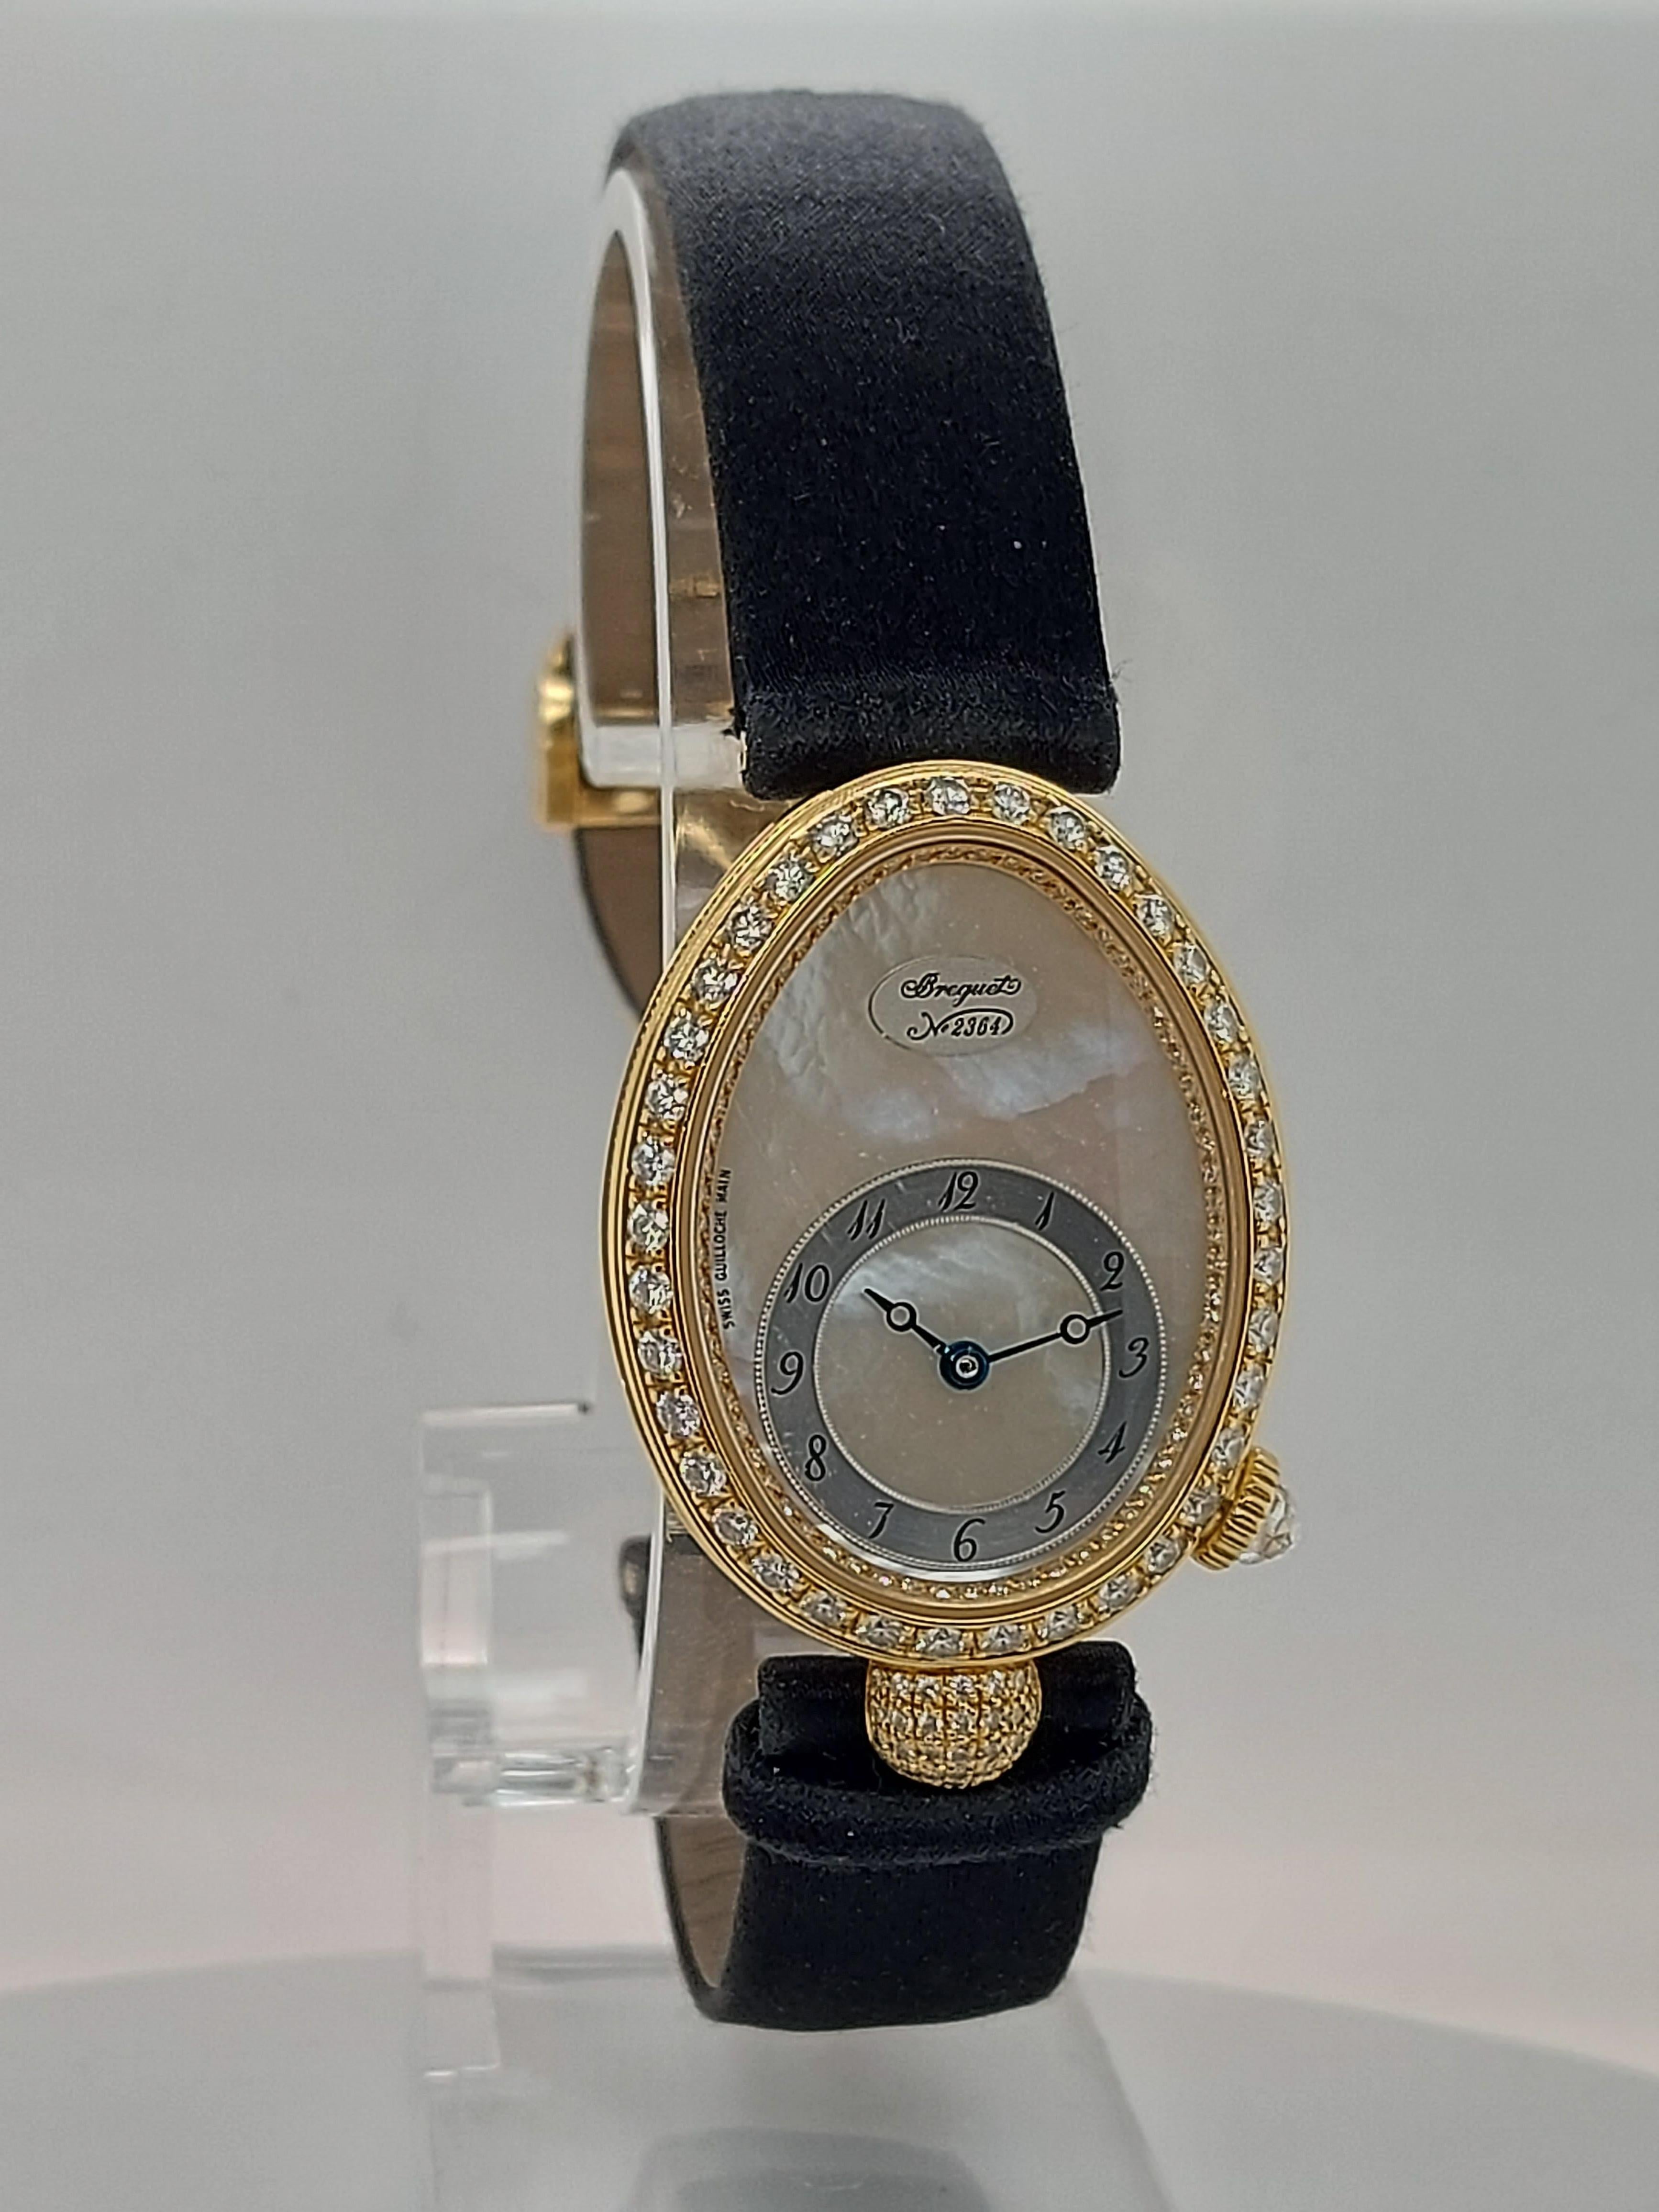 18kt Yellow gold Breguet Reine de Naples, Automatic,Diamonds,MOP Dial, Ref.8928

Reference: 8928

Movement: Automatic, Caliber 596, This watch has a power reserve of approximately 40 hours. 

Functions: Hours, Minutes

Case: 18kt yellow gold oval